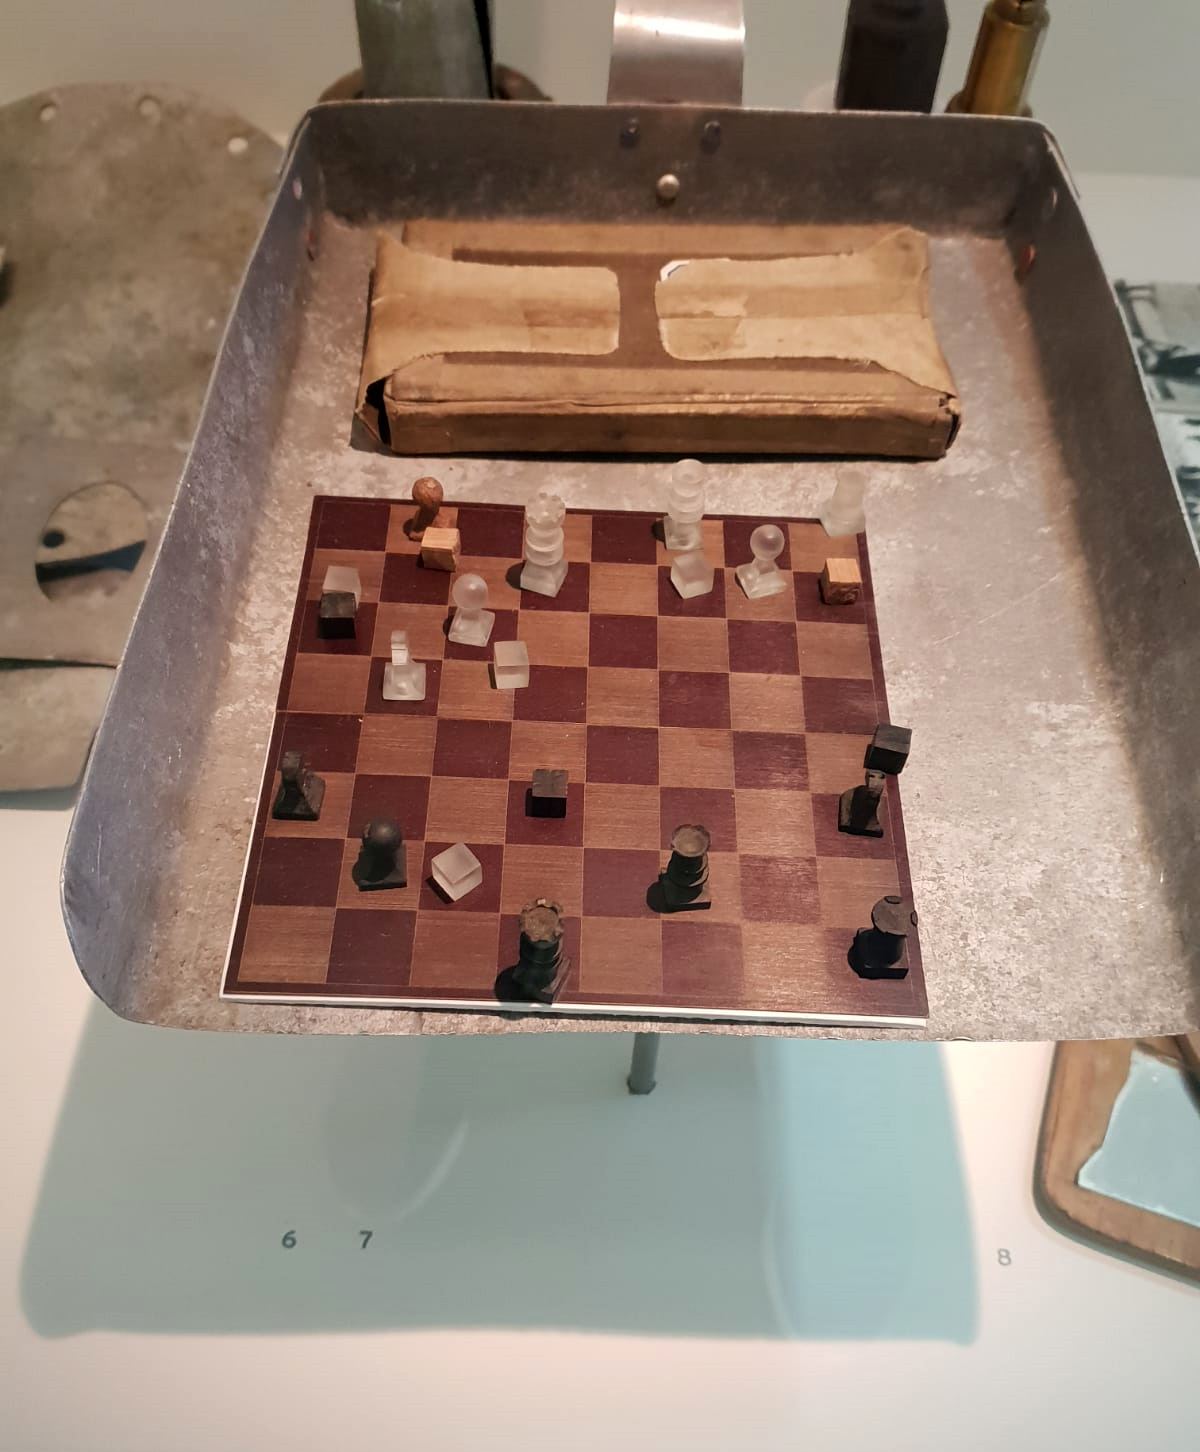 A checkers/chess set belonging to one of the prisoners at Sachsenhausen Concentration Camp